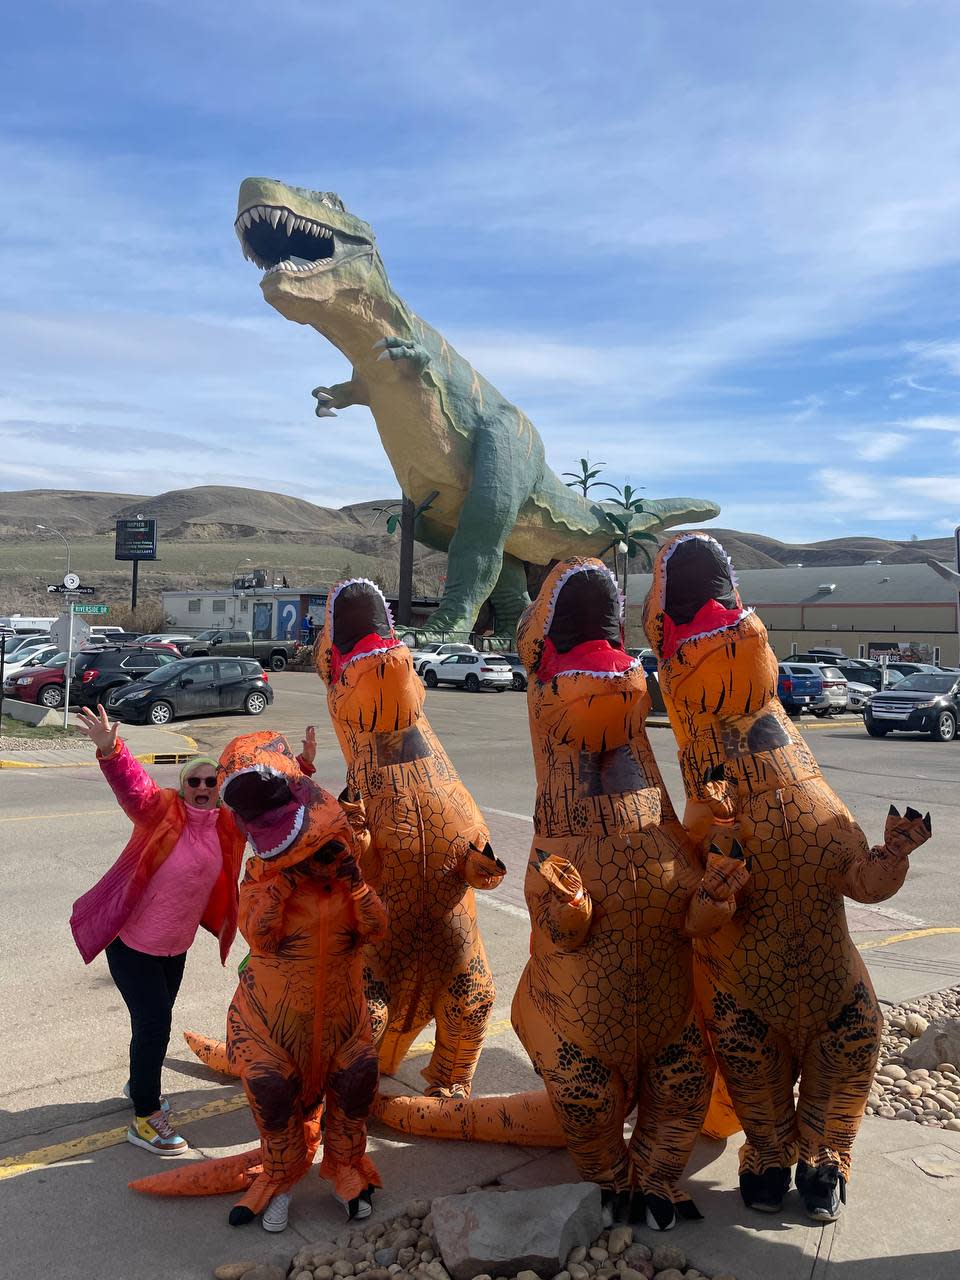 A family of dinosaurs in Drumheller hoping to breaking a world record.